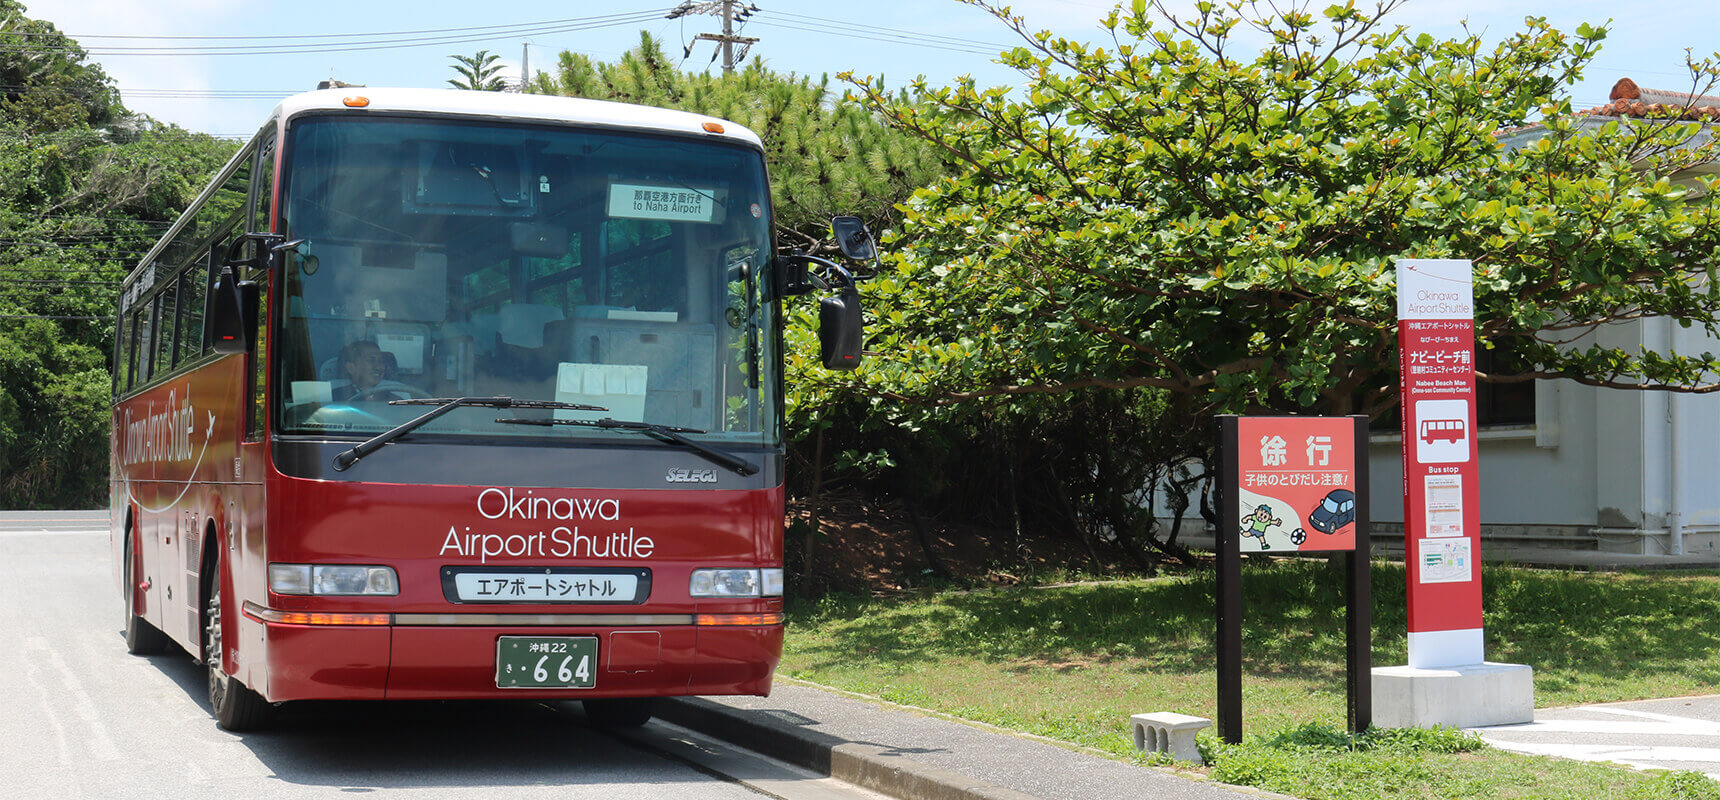 Head straight to Okinawa Churaumi Aquarium with Okinawa Airport Shuttle! Find out more about this excellent bus trip.